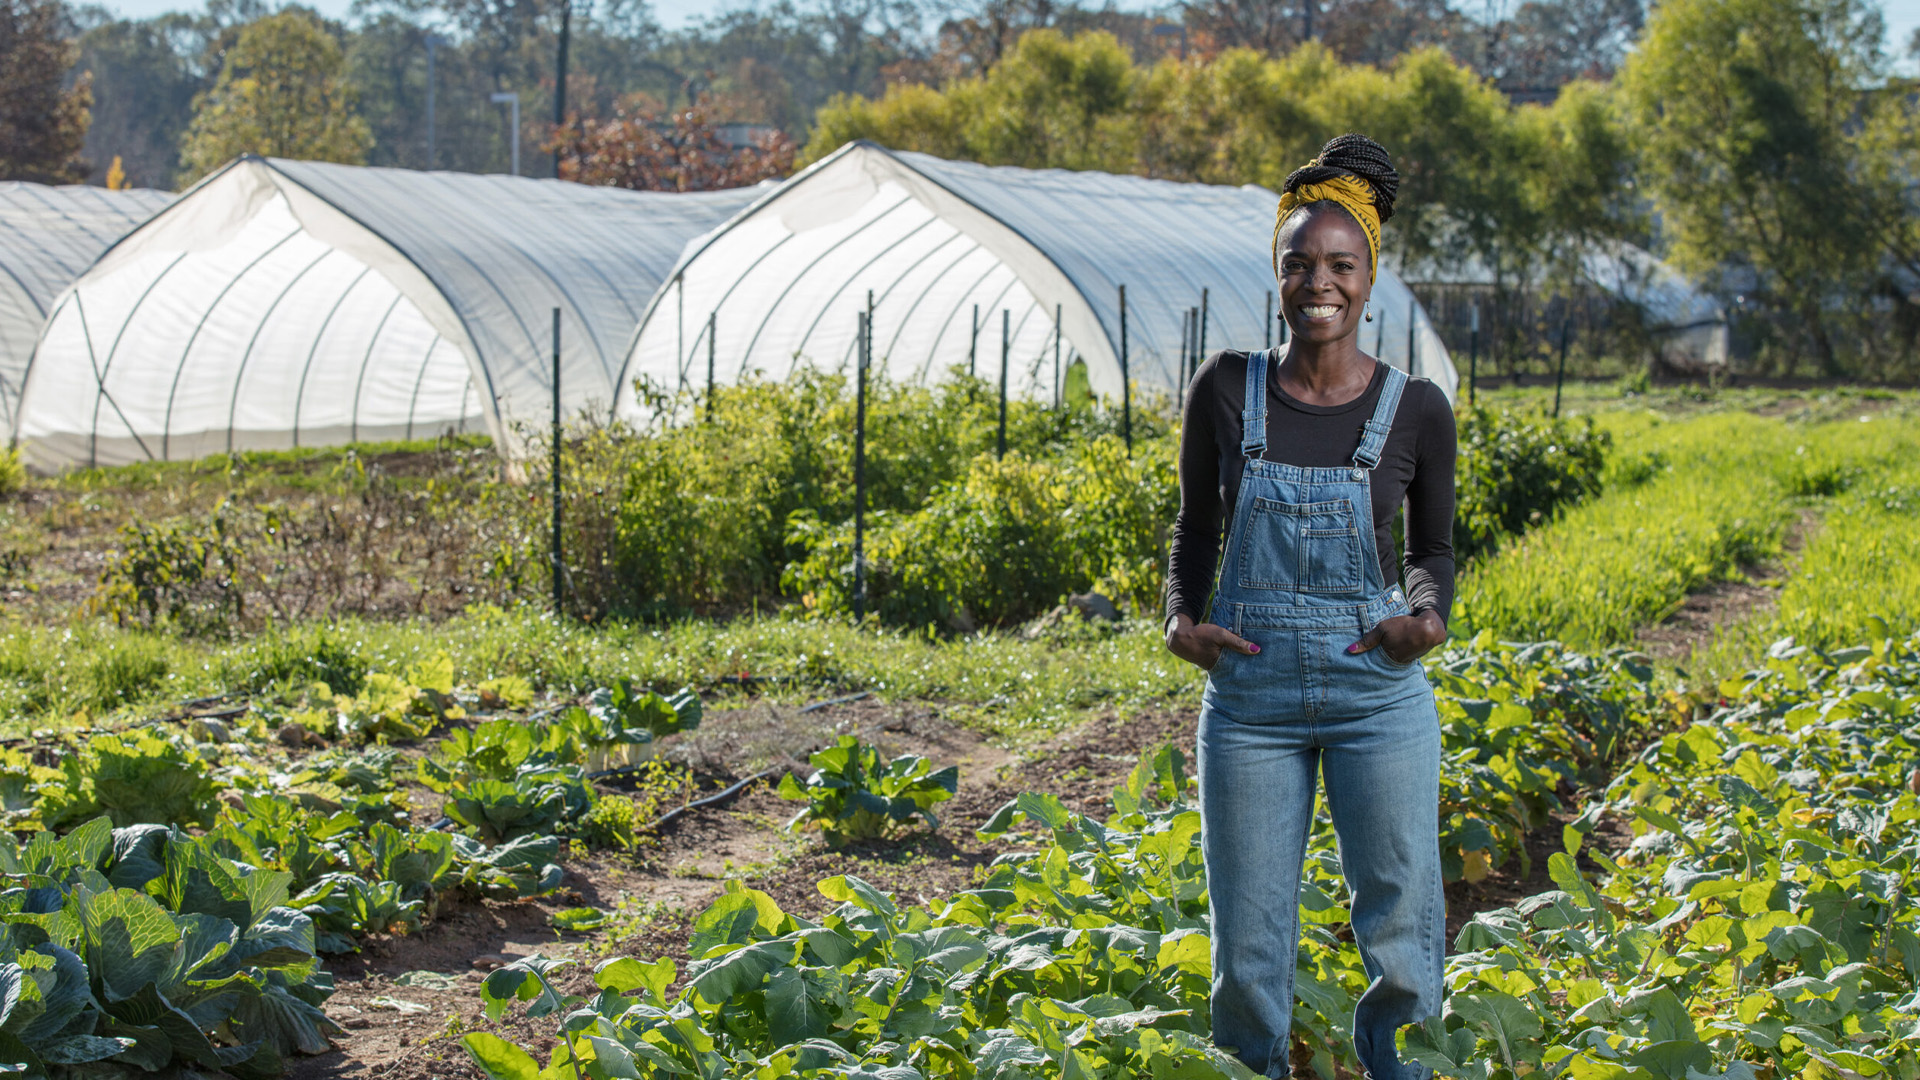 Jamila Norman Of 'Homegrown' Shares How She Taps Into Her Engineering Background To Cultivate Success As An Independent Farmer